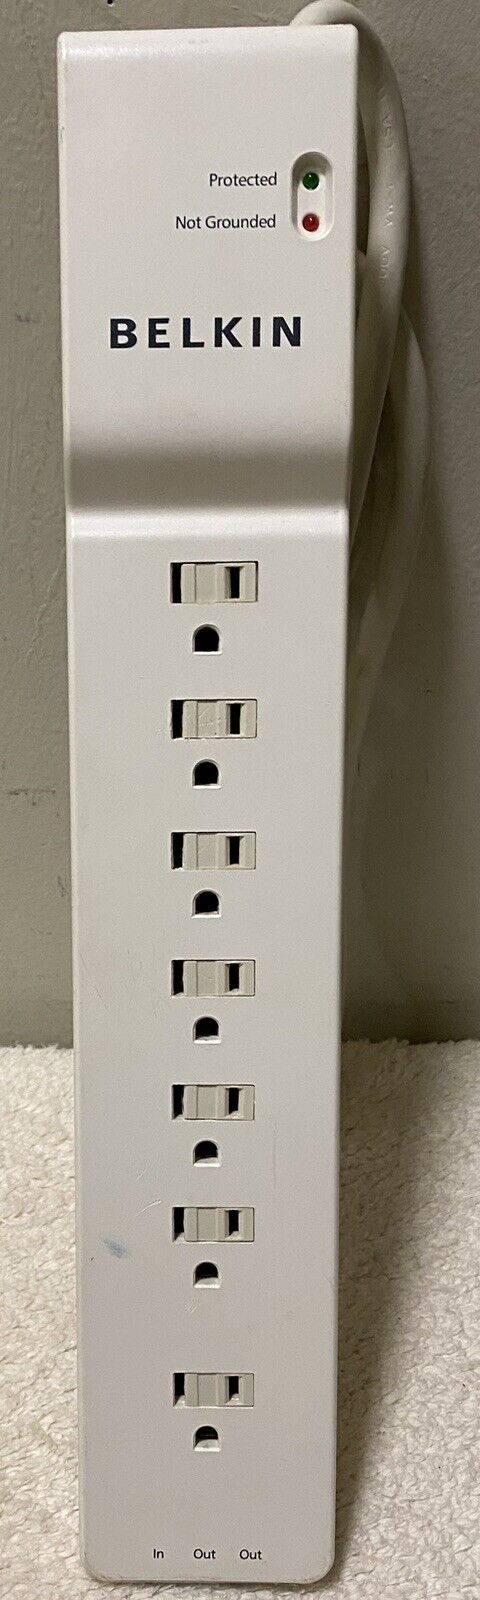 Belkin Power Strip Surge Protector 7 Outlet with 12 Foot Power Cord White